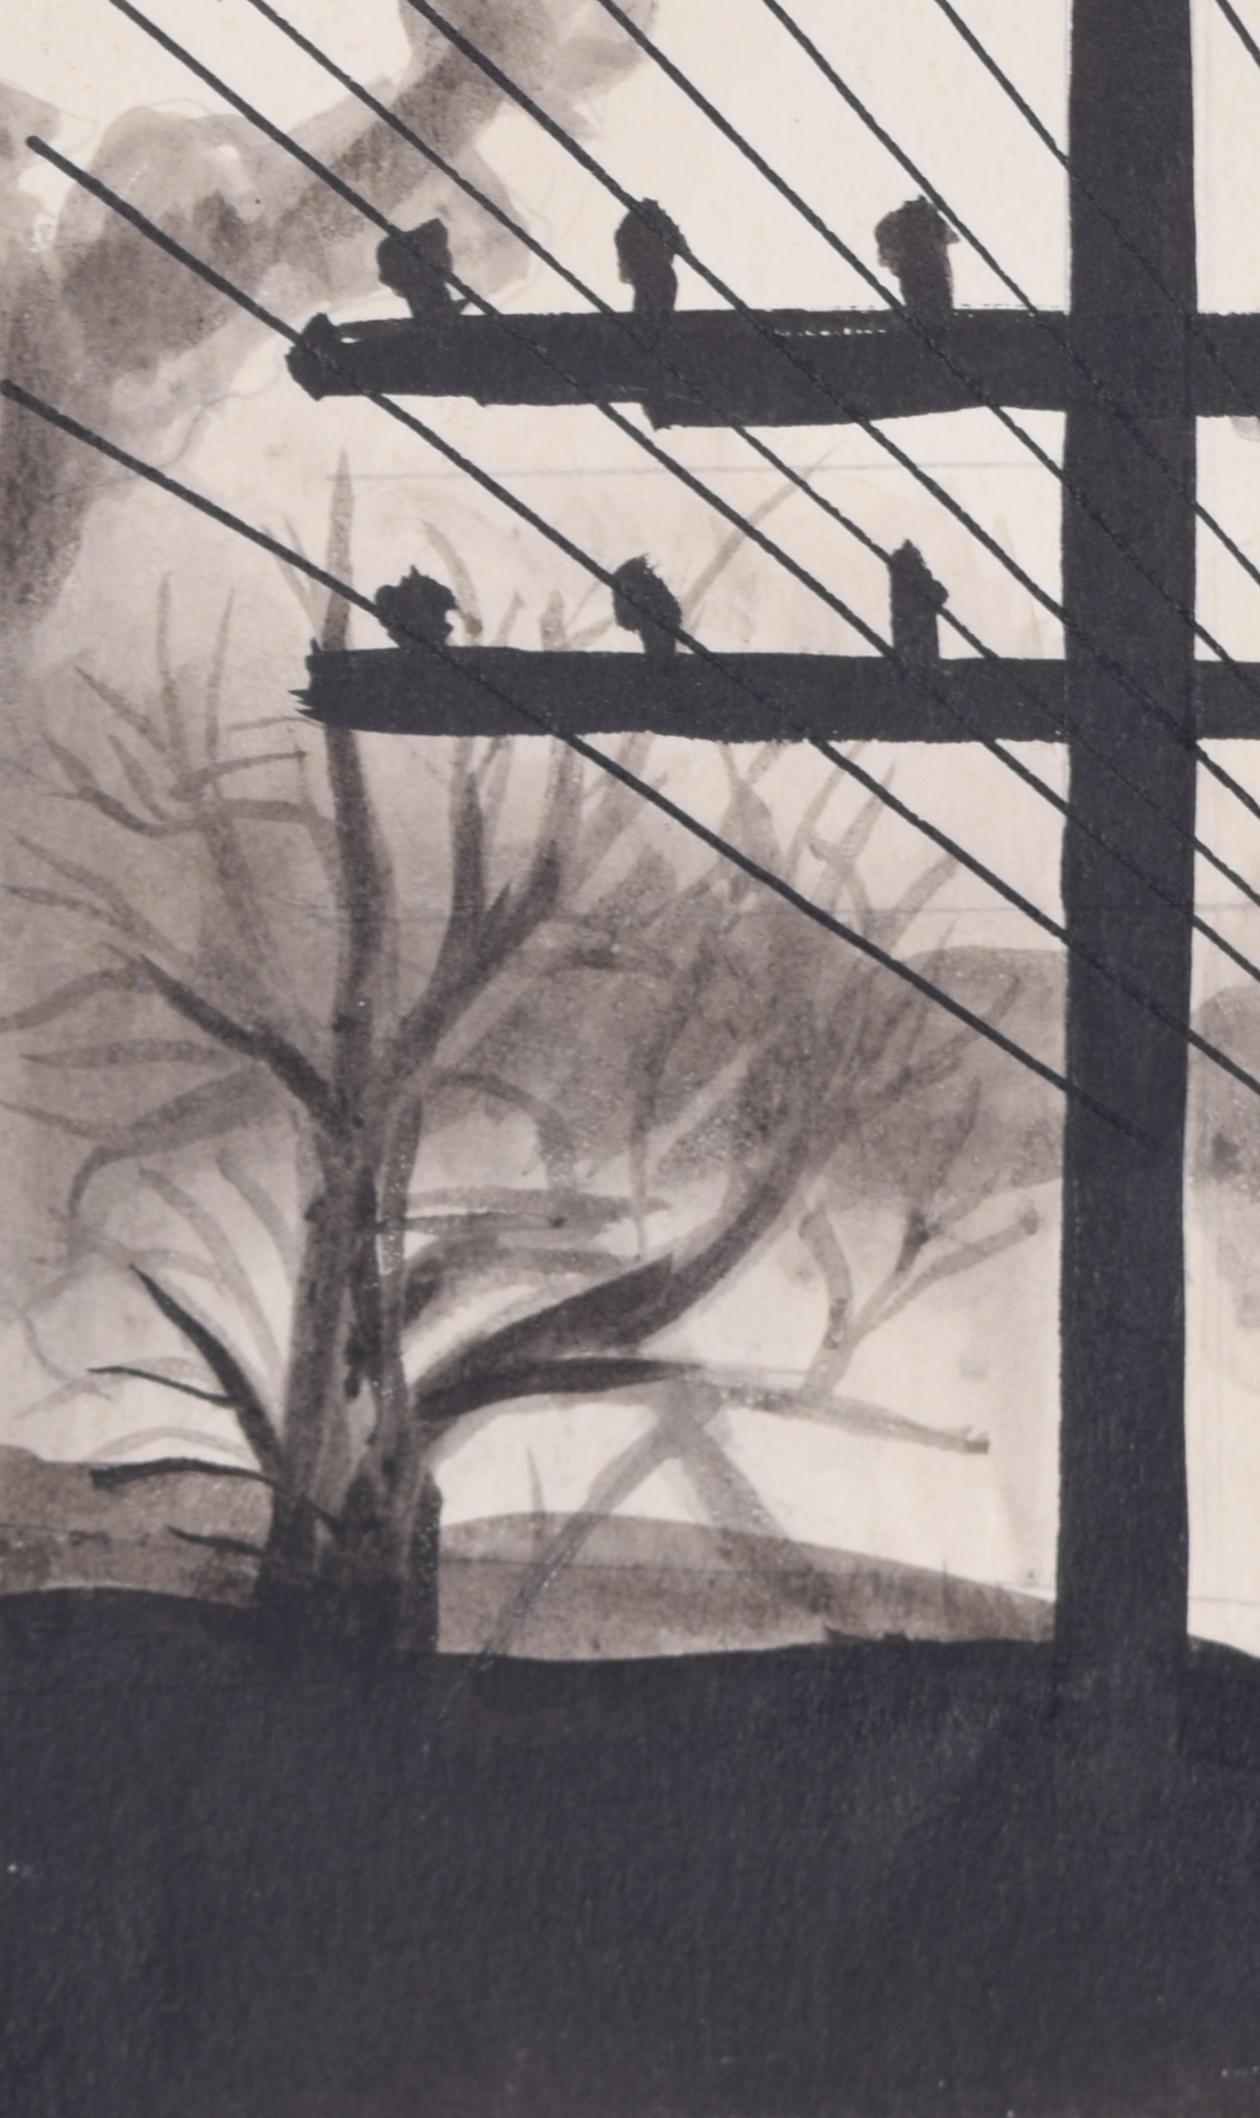 Telegraph wires and poles watercolour and pencil drawing by Gerald Mac Spink 1